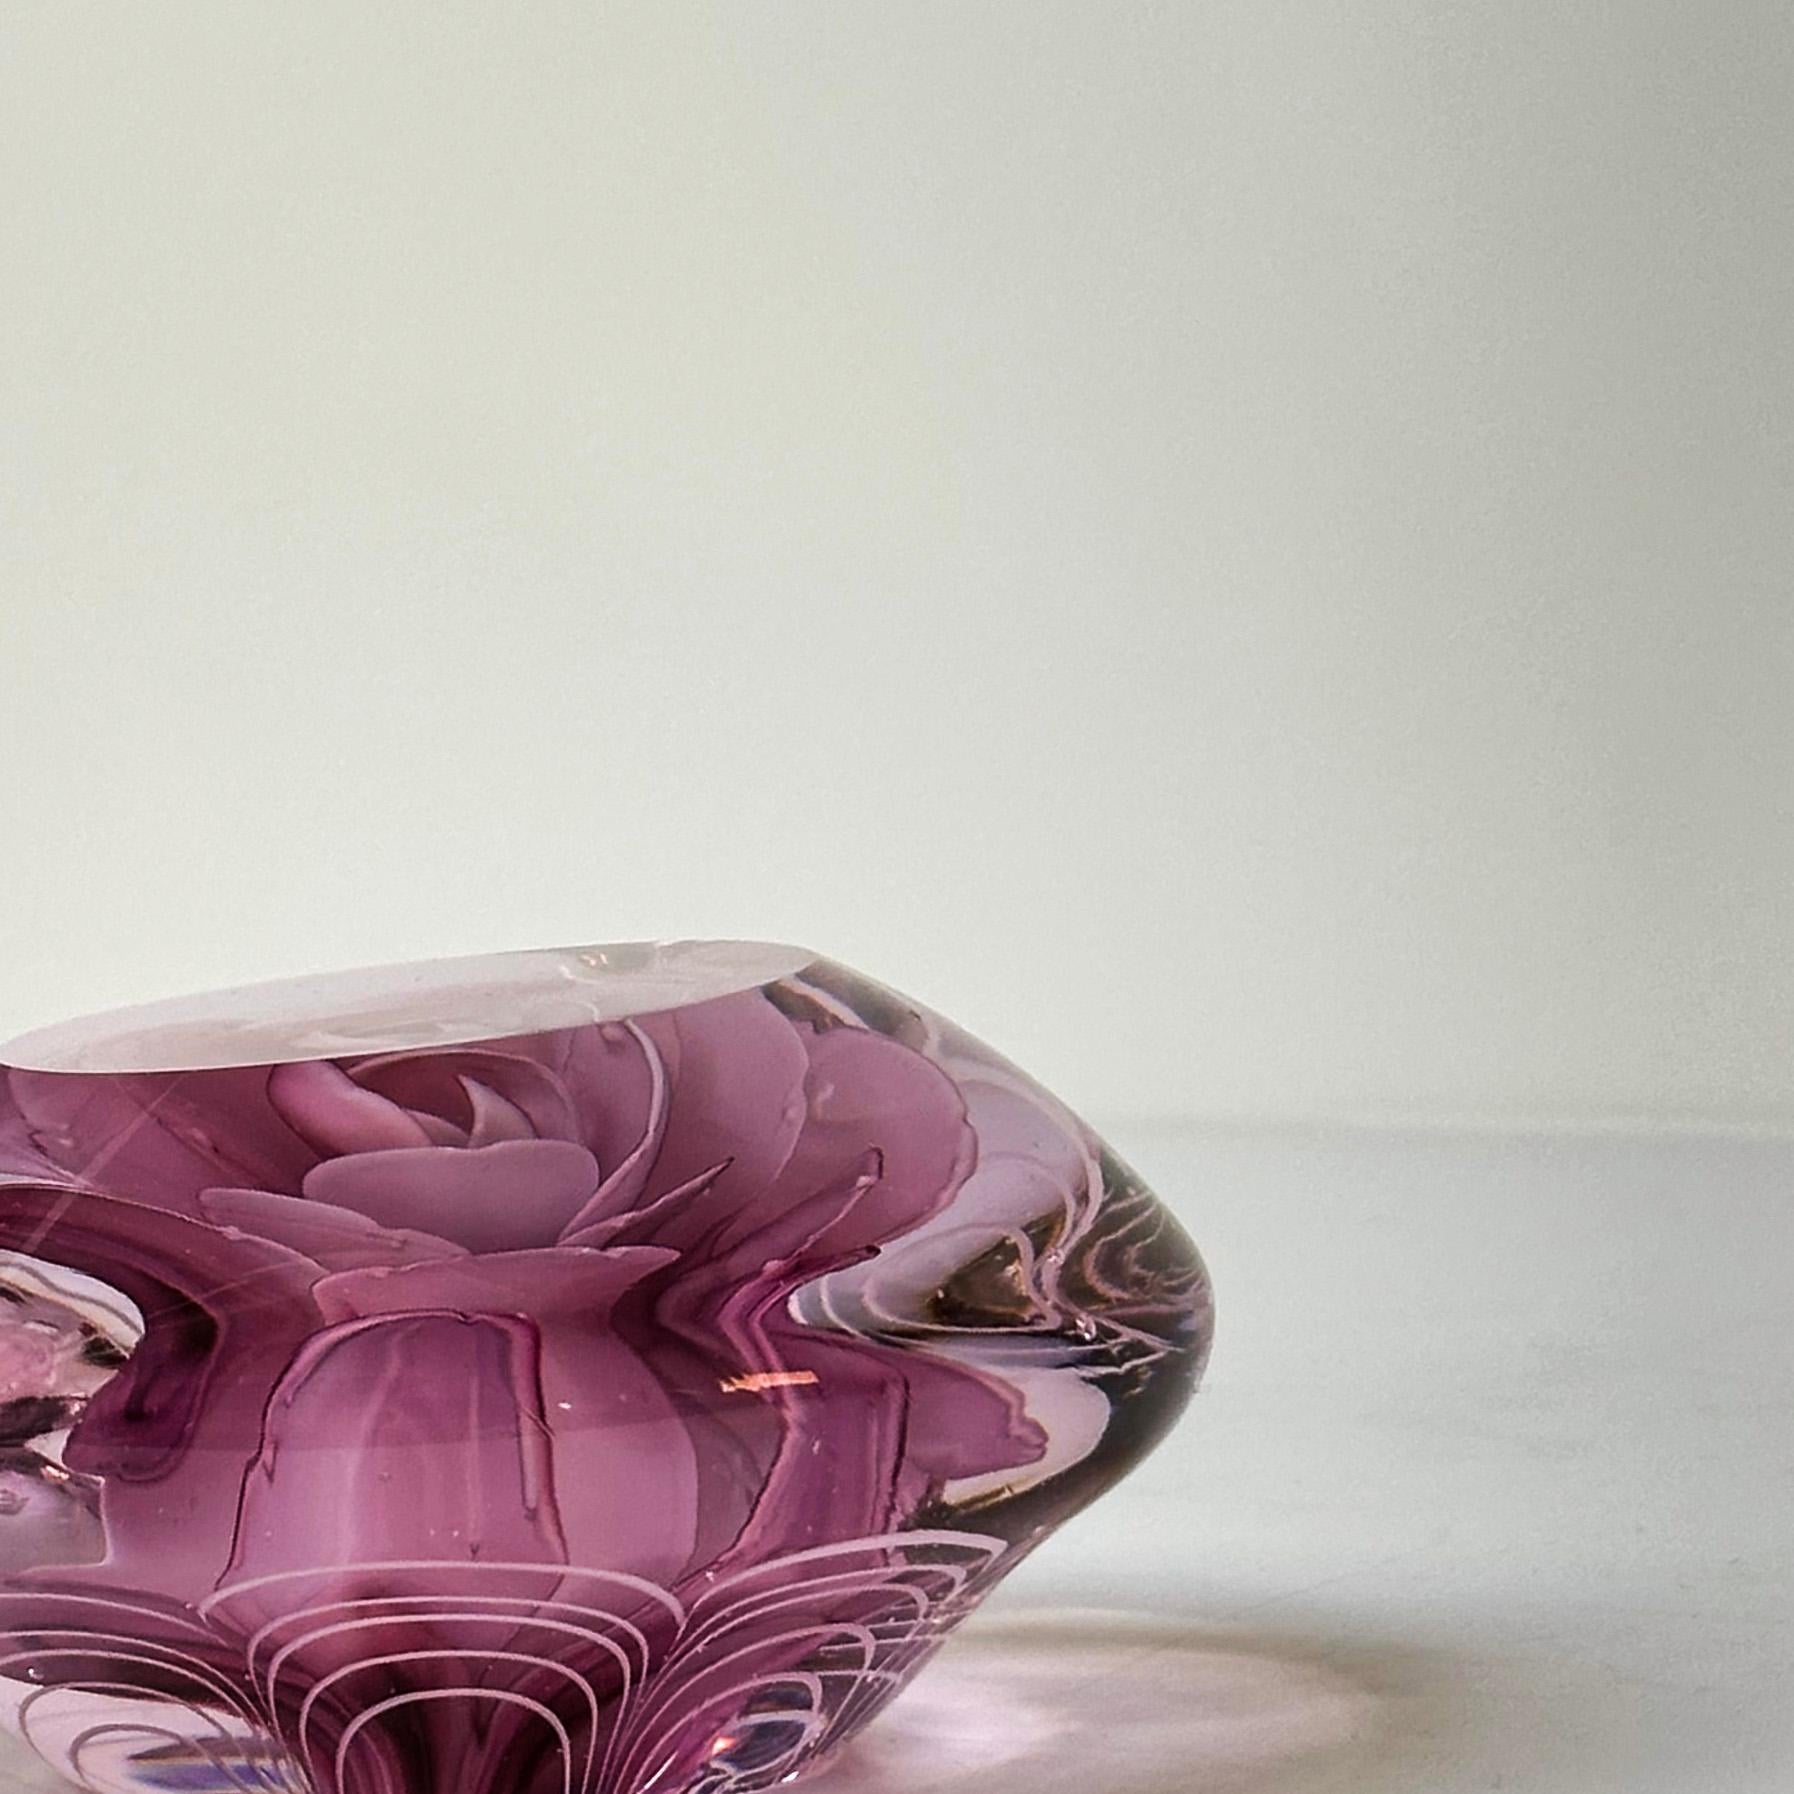 Other Vintage Heart Shaped Pink Glass Paperweight with Rose Petal Centre